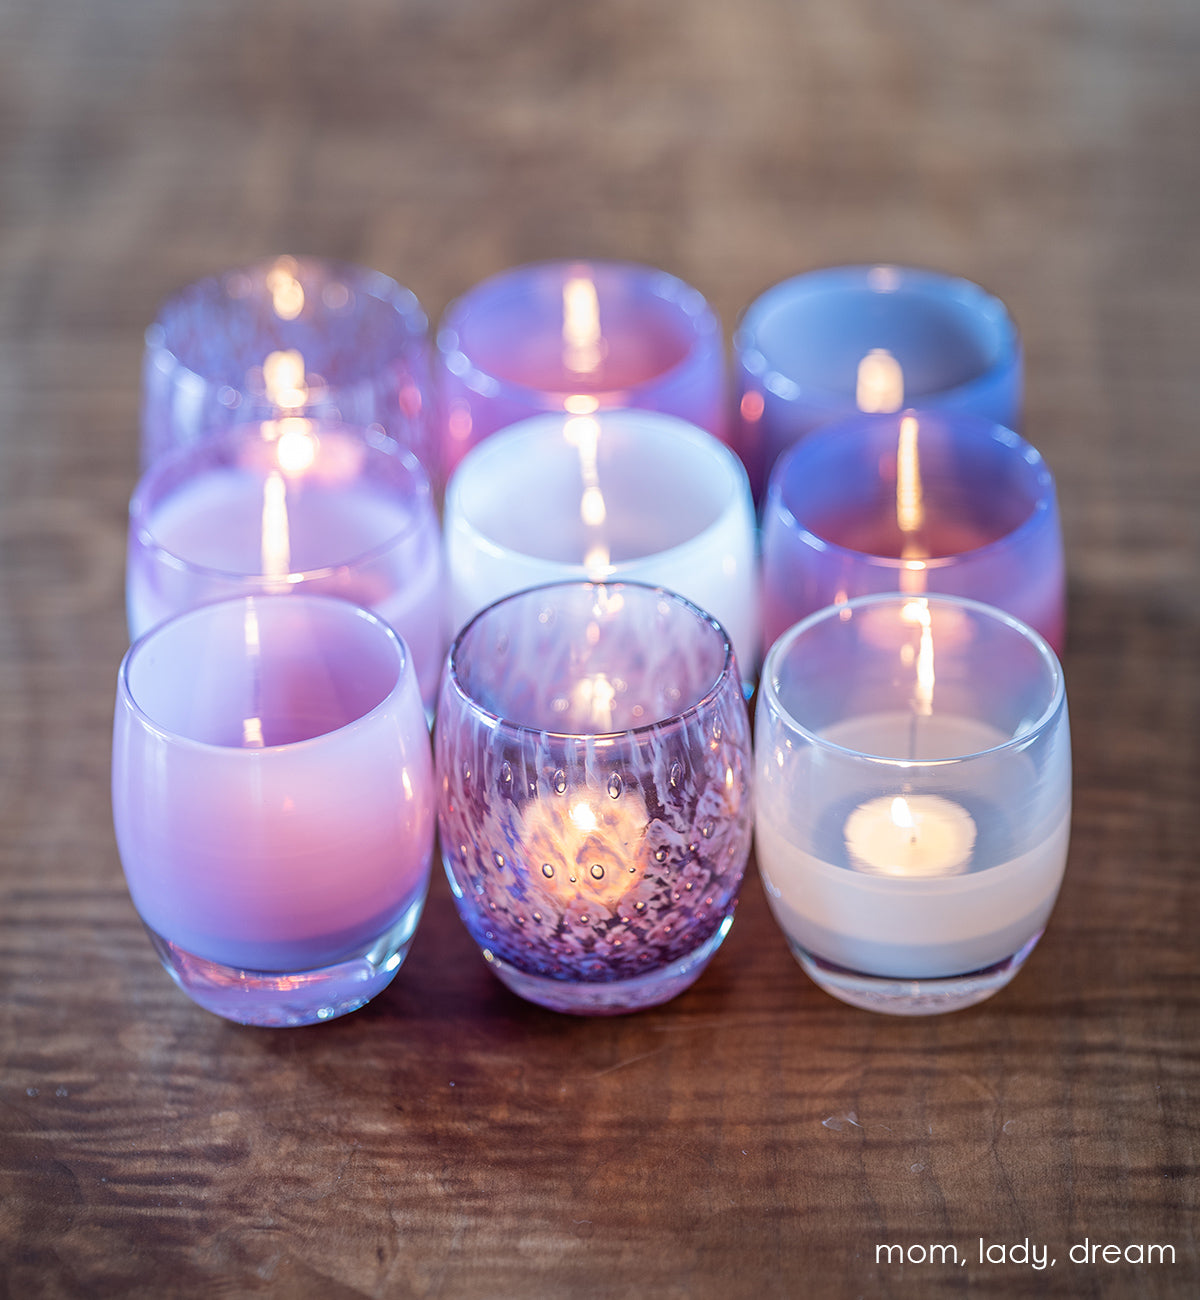 lady purple bubble, hand-blown glass votive candle holder. paired with mom and dream.